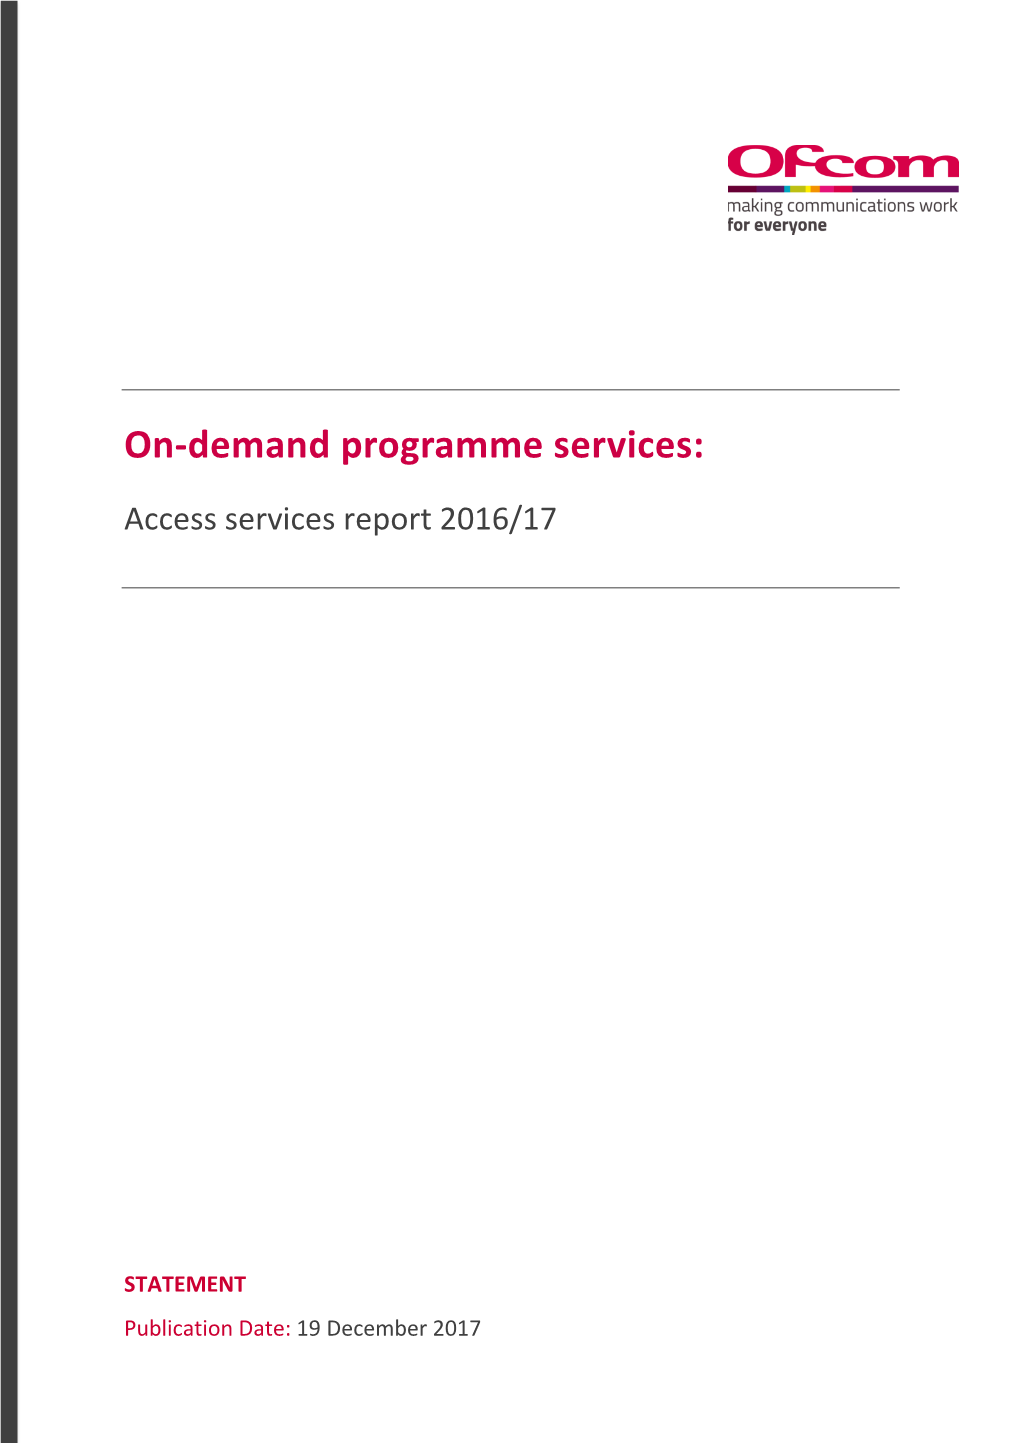 On-Demand Programme Services: Access Services Report 2017